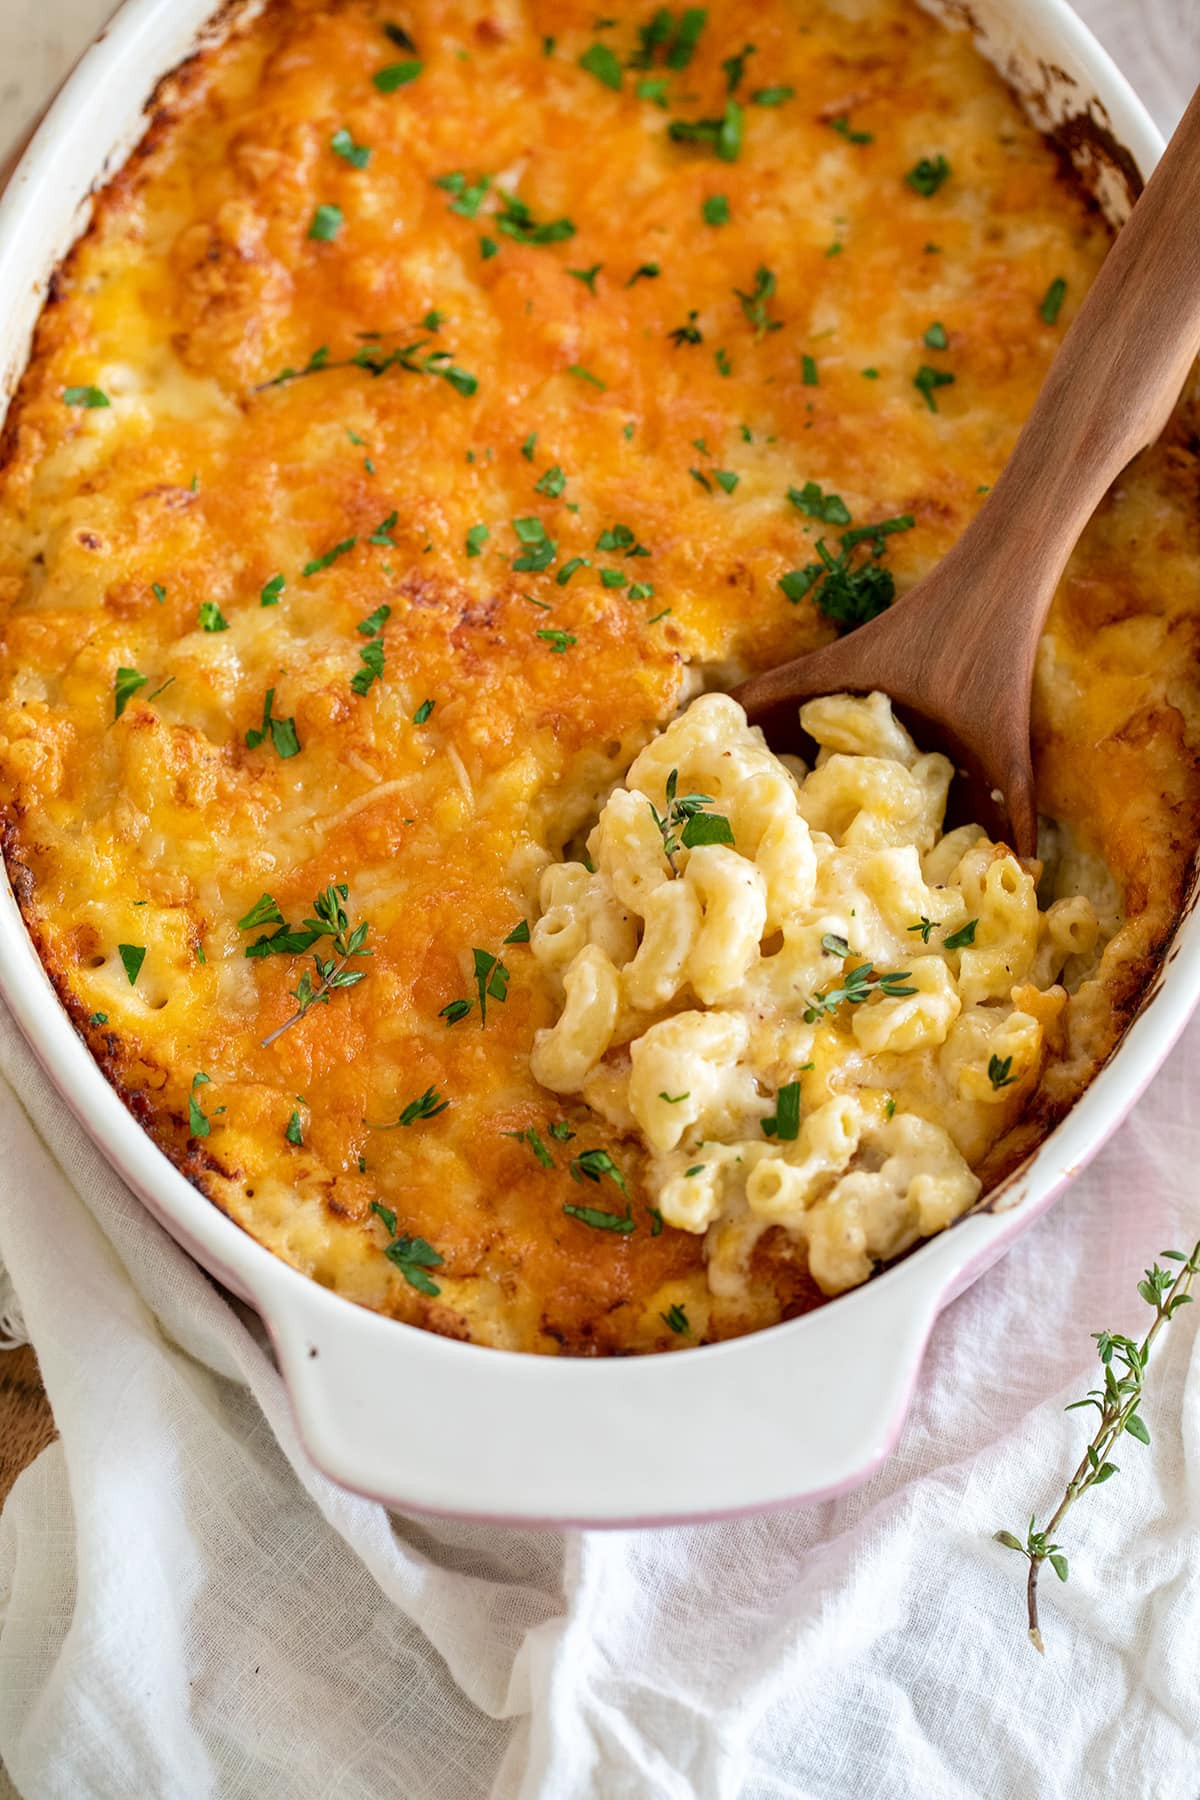 Baked Macaroni and Cheese with Cream Cheese New Creamy Homemade Baked Macaroni and Cheese • Freutcake